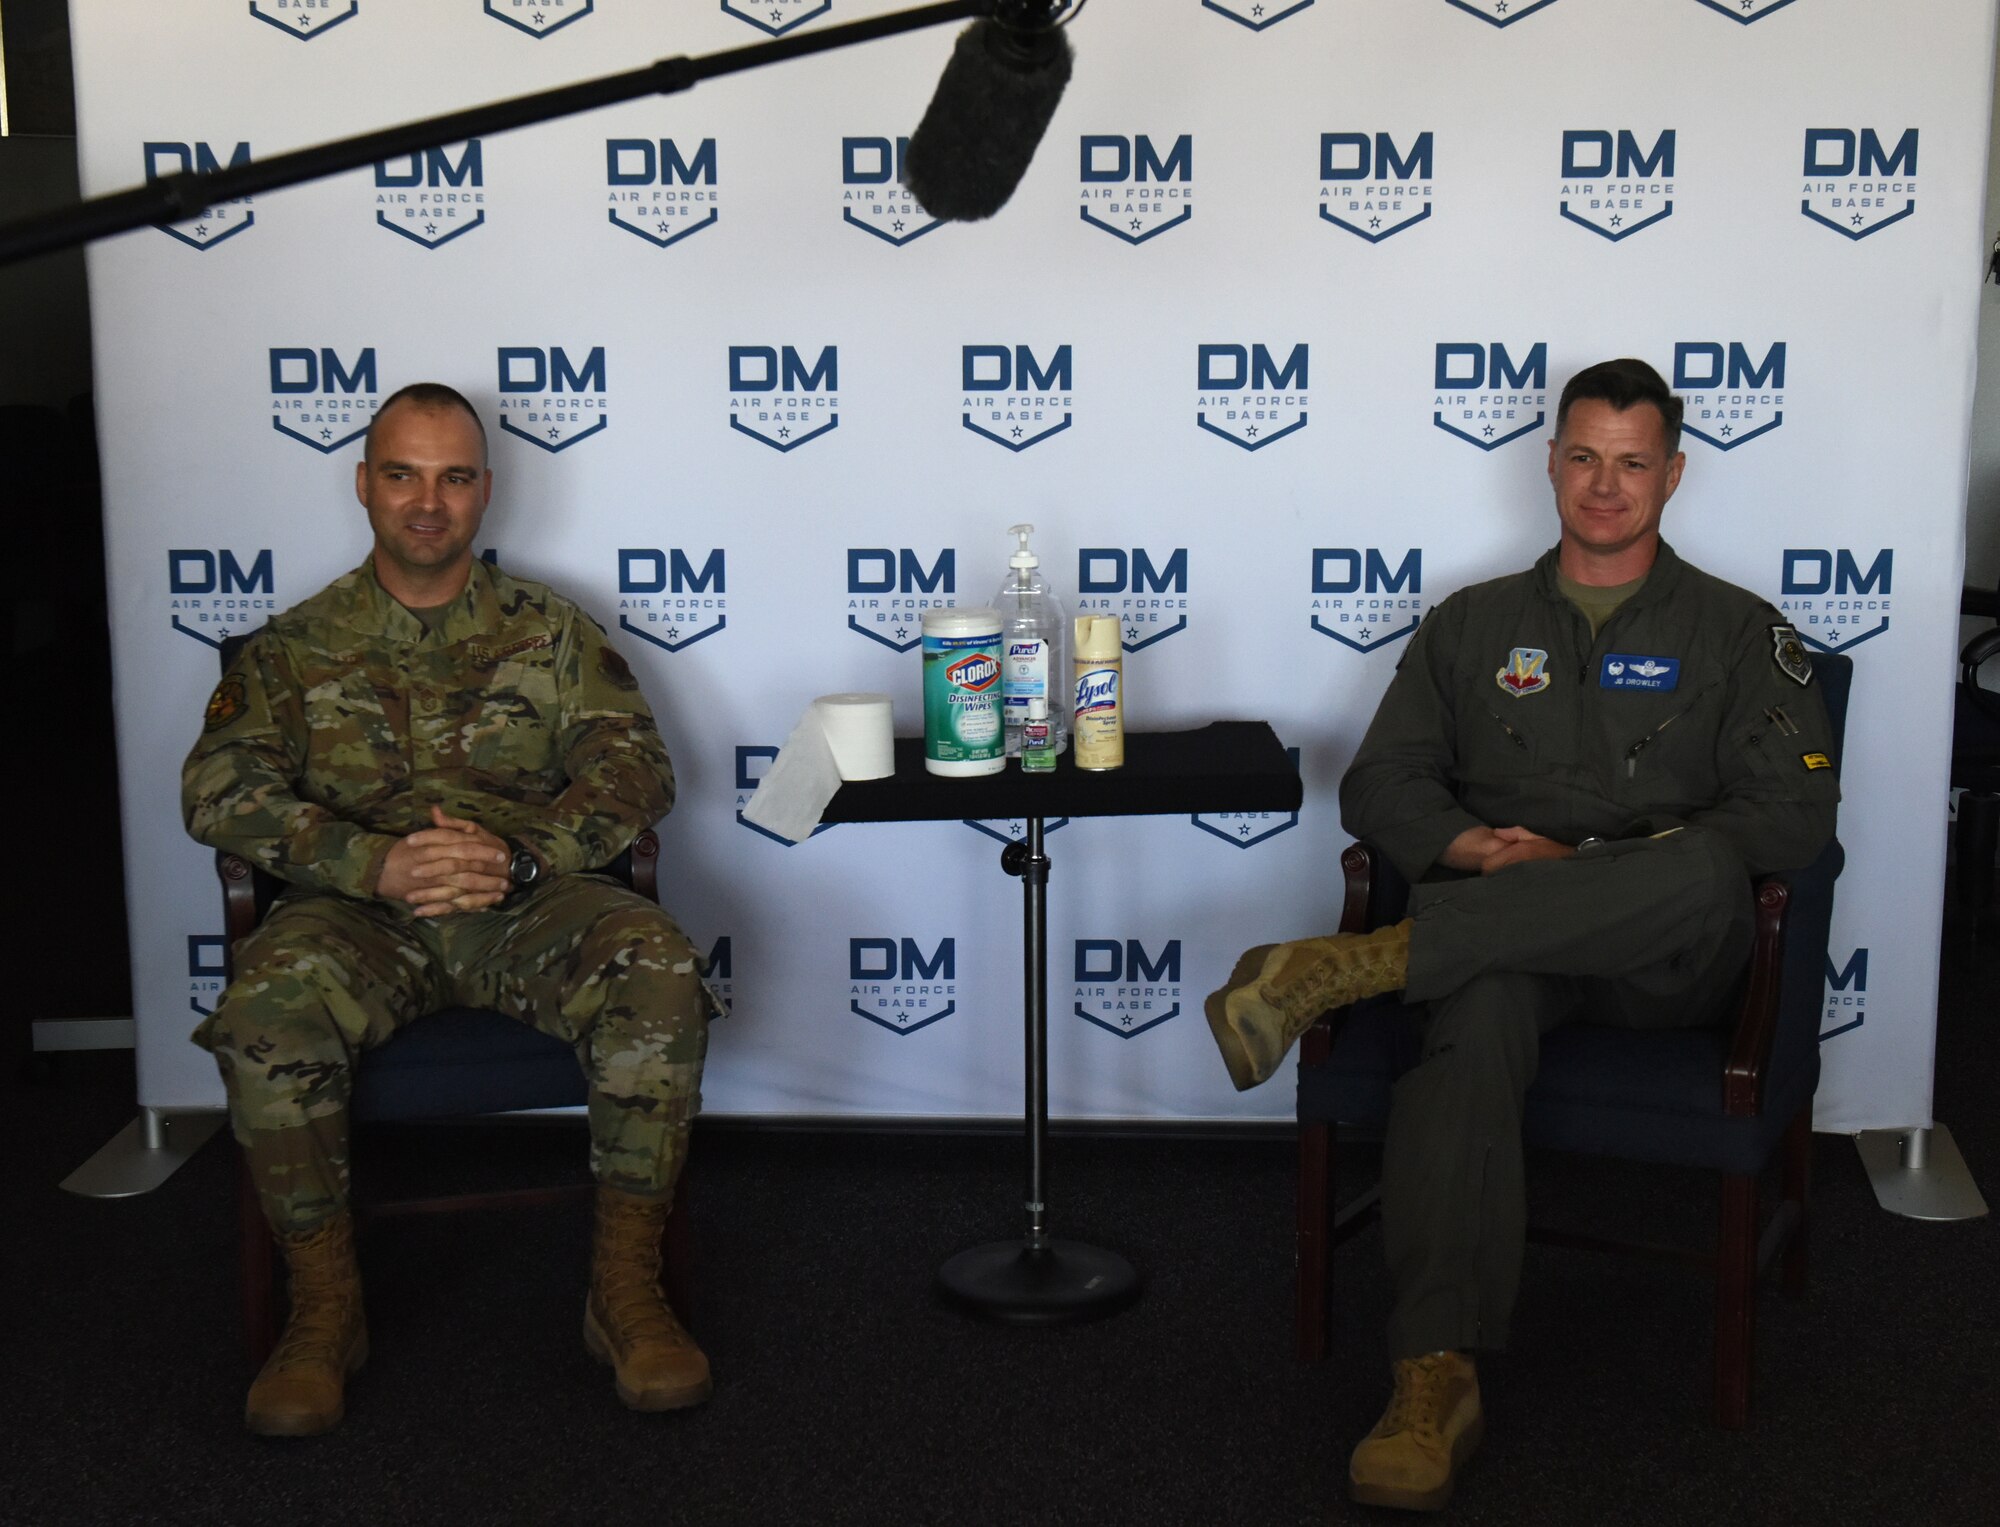 A photo of Davis-Monthan Air Force Base leadership sitting and getting ready for a live-stream broadcast in an office